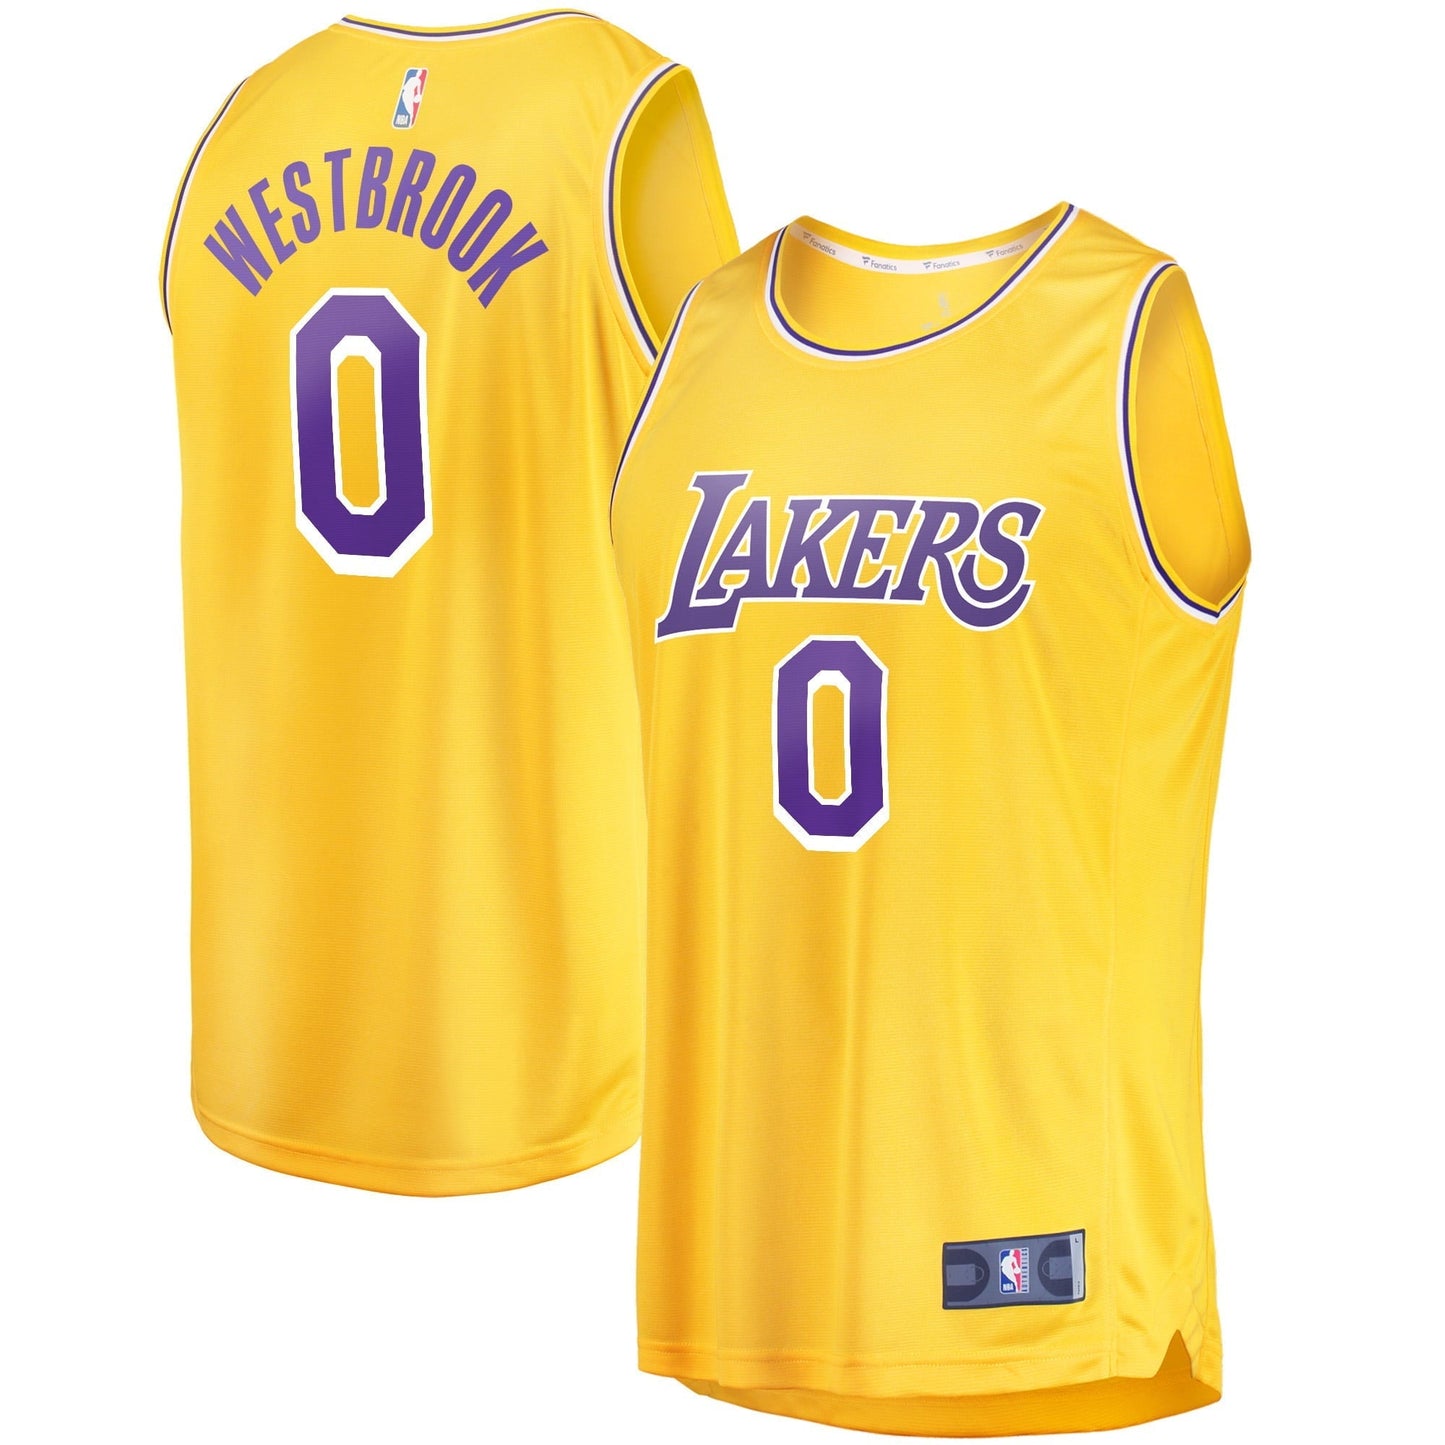 Men's Fanatics Branded Russell Westbrook Gold Los Angeles Lakers 2020/21 Fast Break Player Jersey - Icon Edition